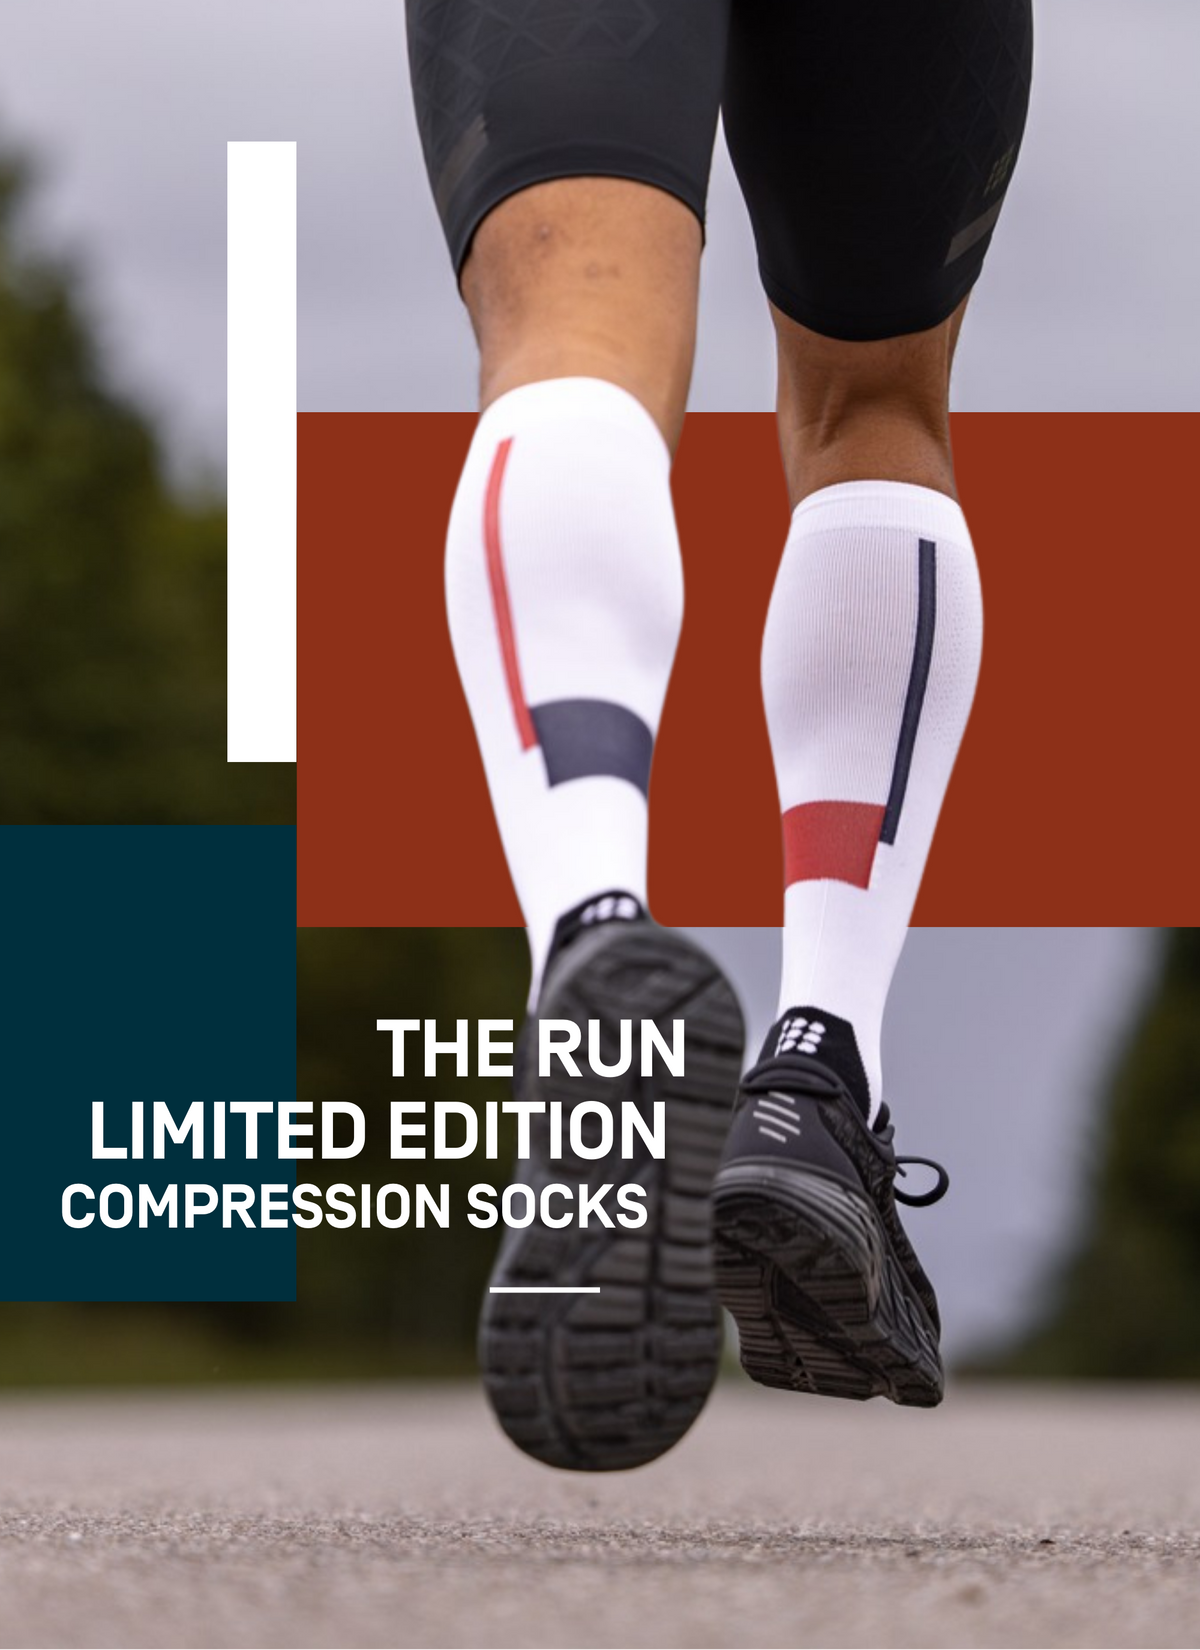 CEP Compression Sleeves